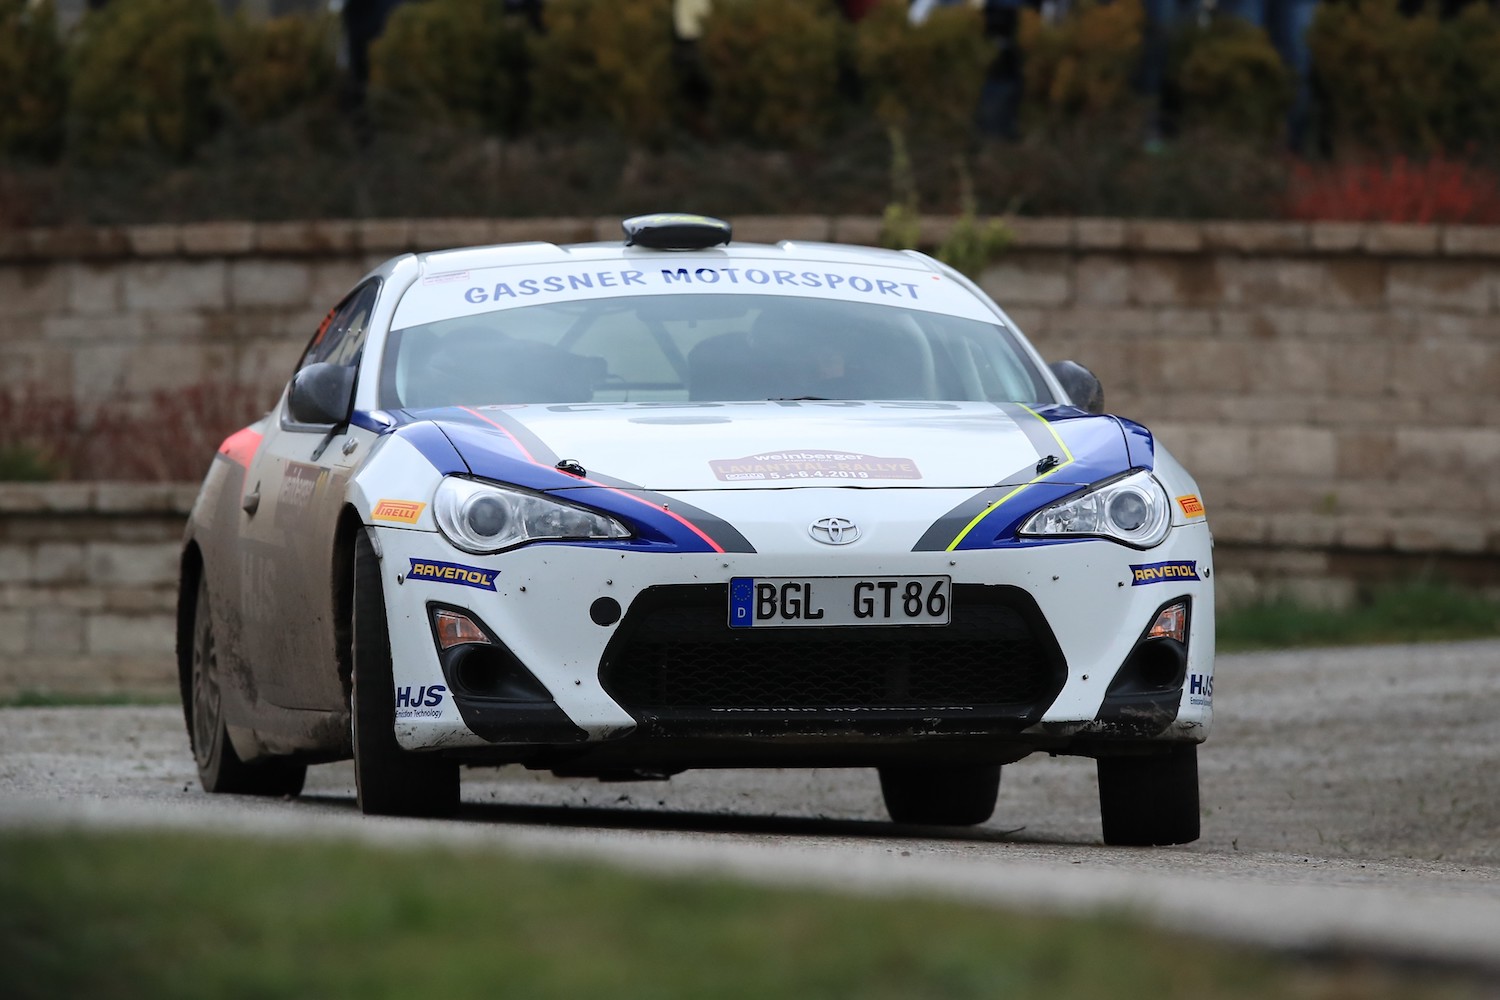 toyota 86 at a rally race